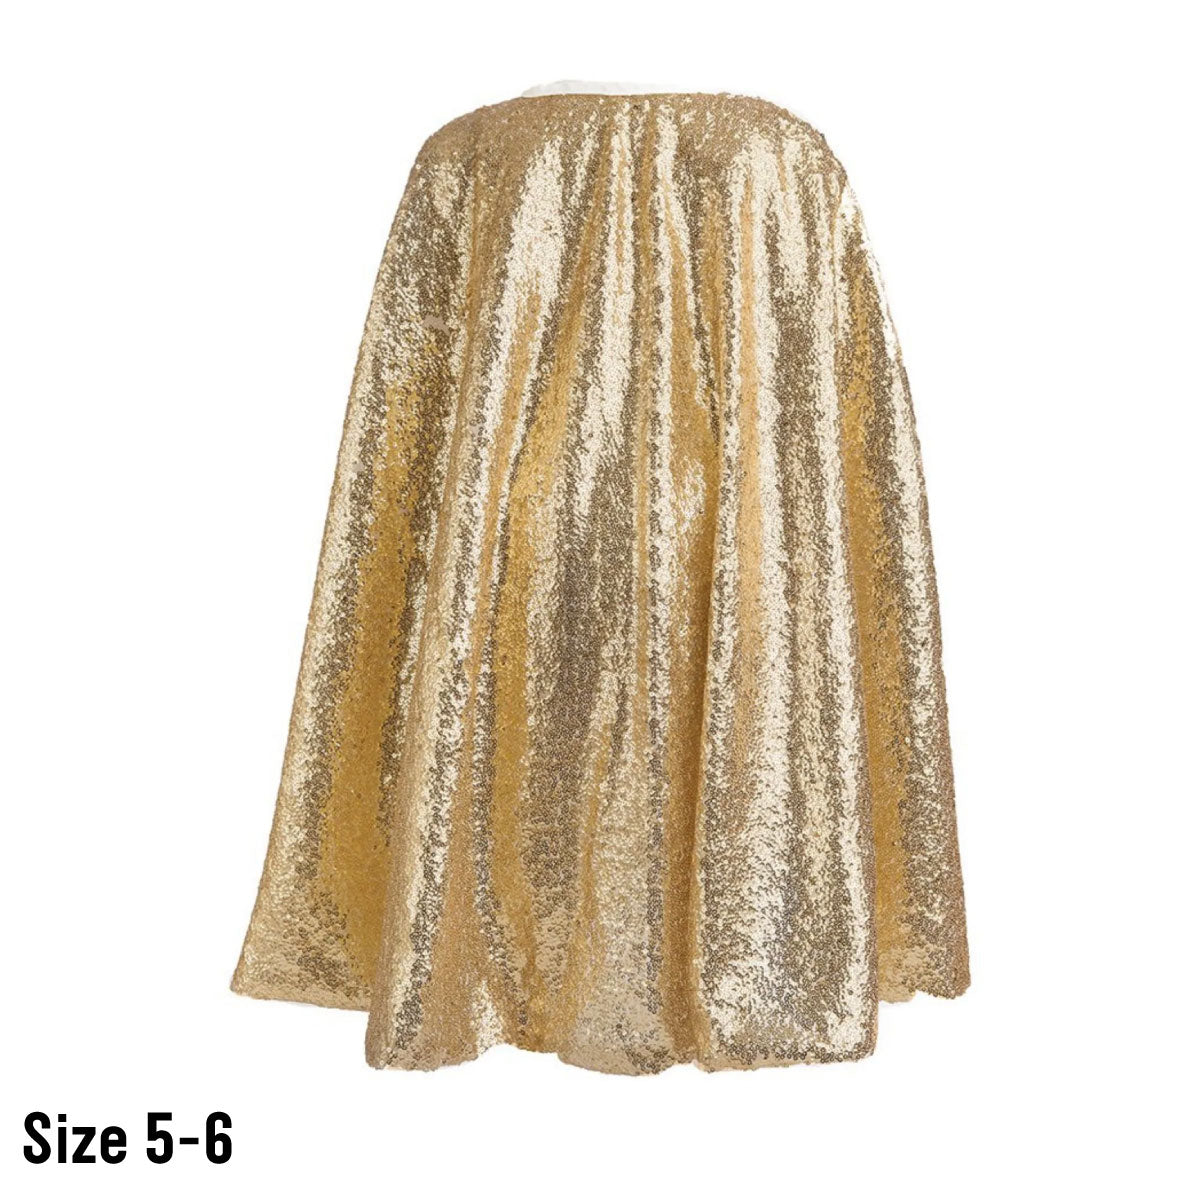 Gracious Gold Sequin Cape from Great Pretenders